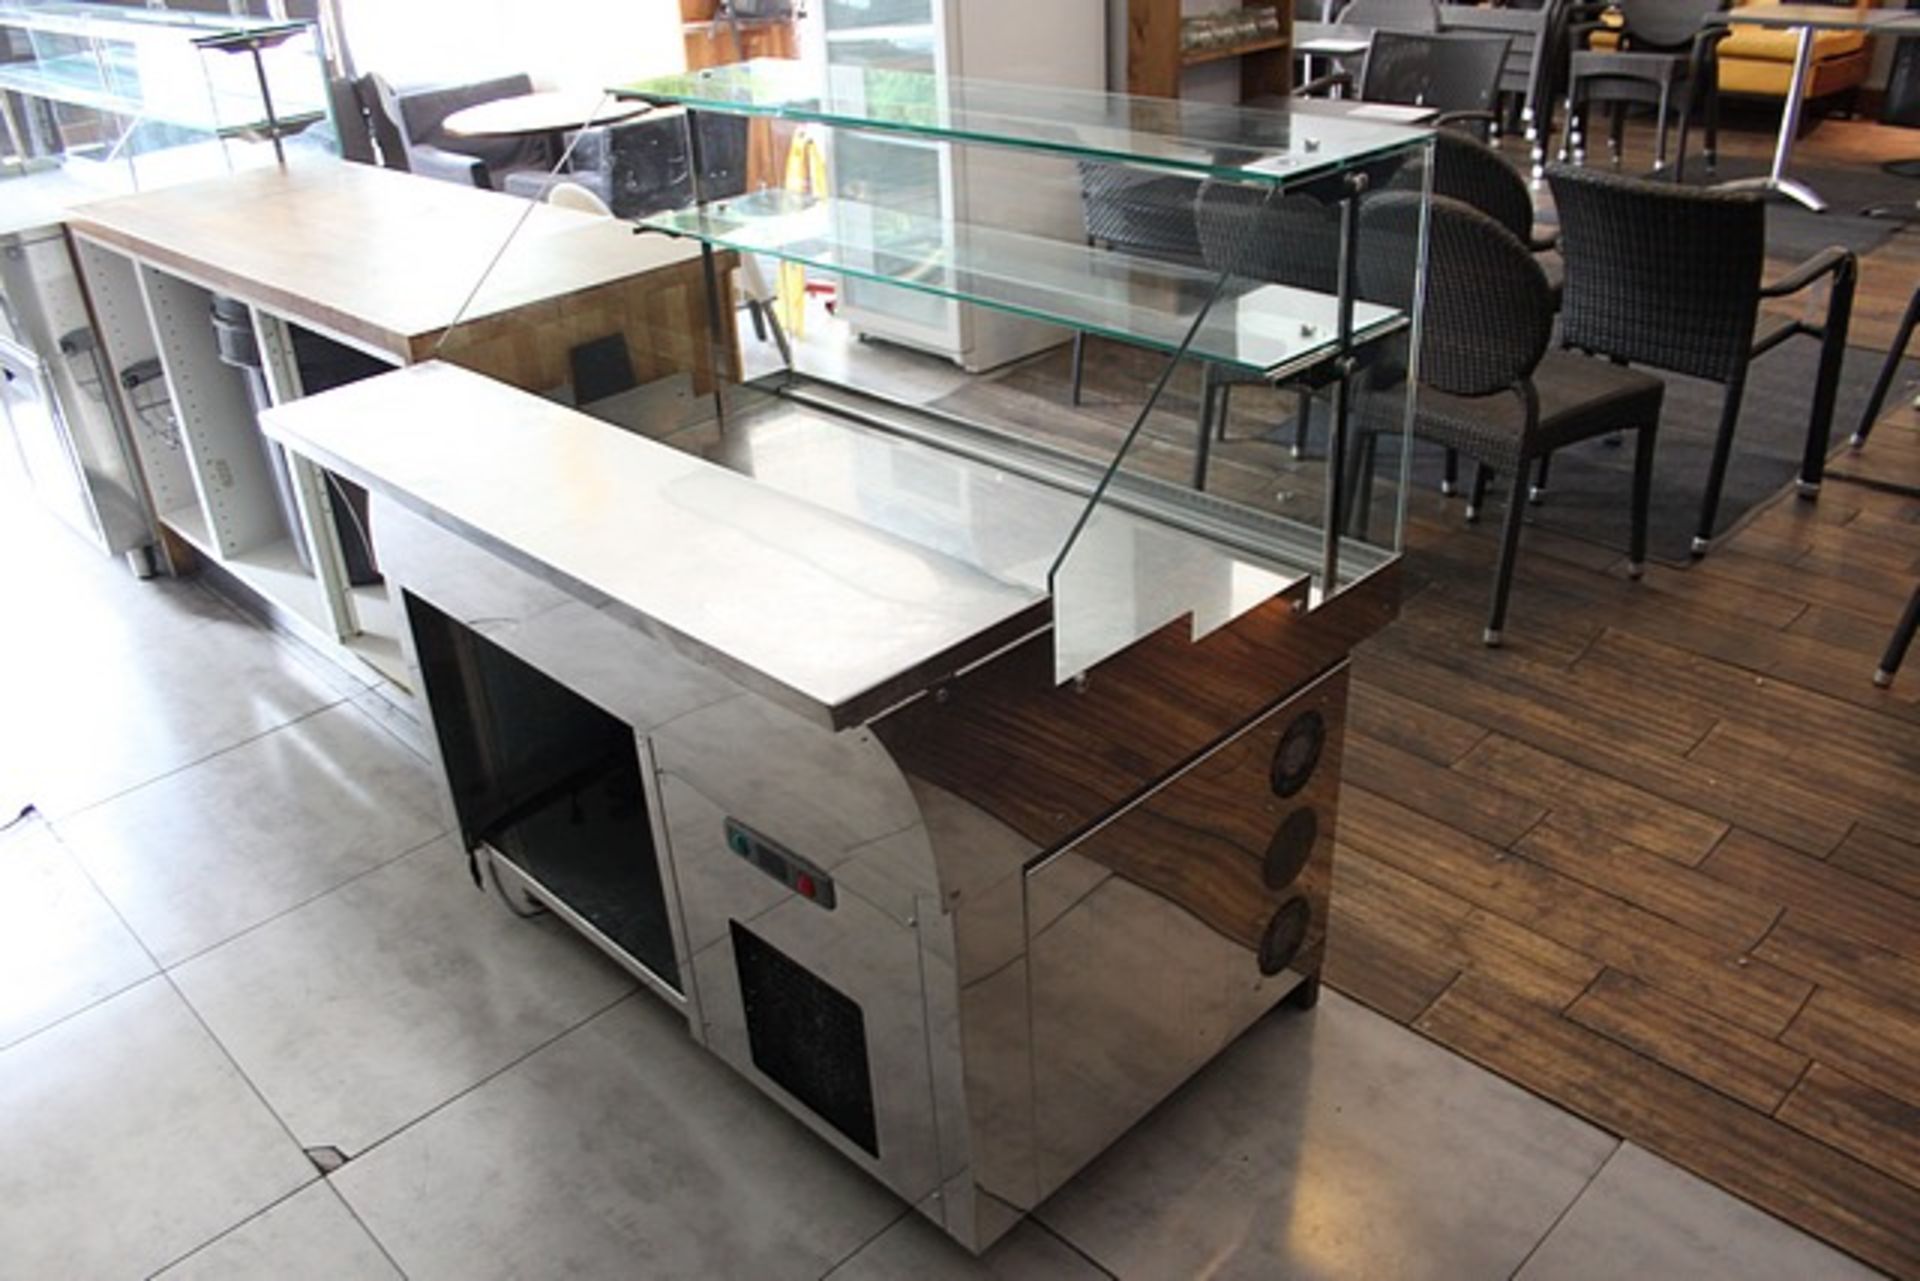 Refrigerated preparation counter serve over glass fronted counter with internal shelf and open - Image 3 of 3